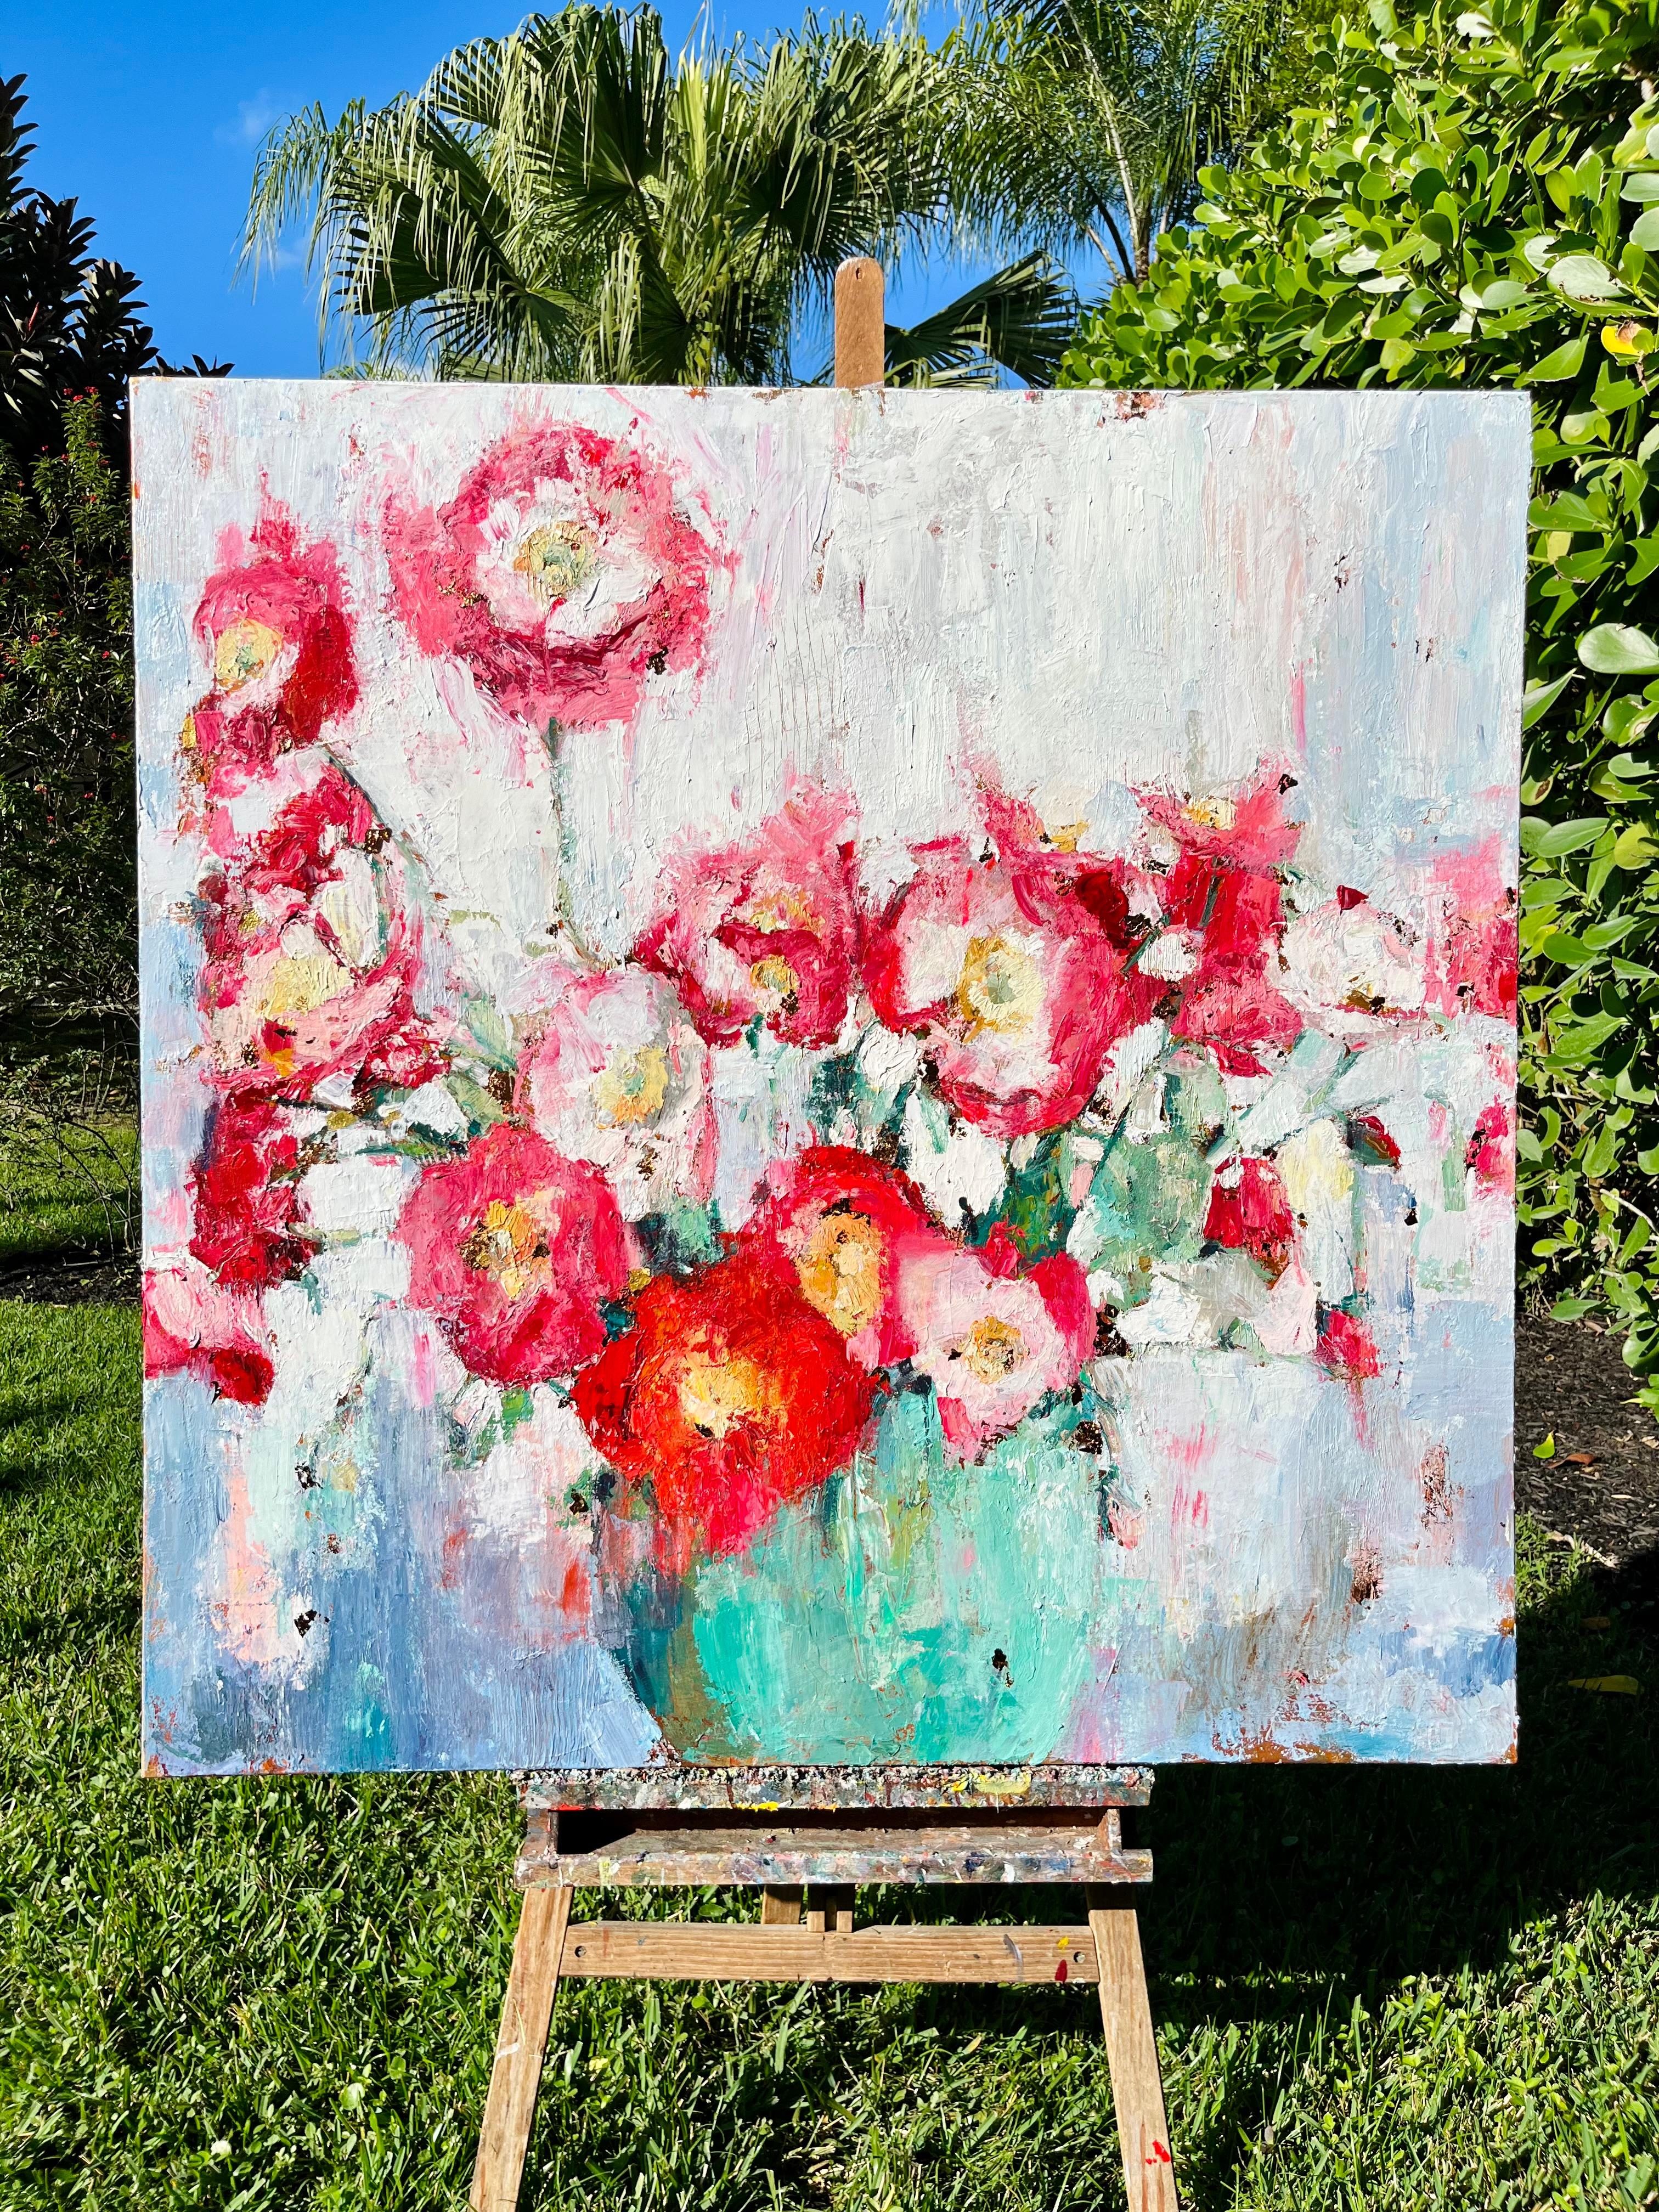 <p>Artist Comments<br>Pink and red poppies share a whimsical dance within the green vase. The use of thick paint and delicate gold leaf adds a layer of richness to the still-life painting, creating a warm and delightful atmosphere. Its rich textures